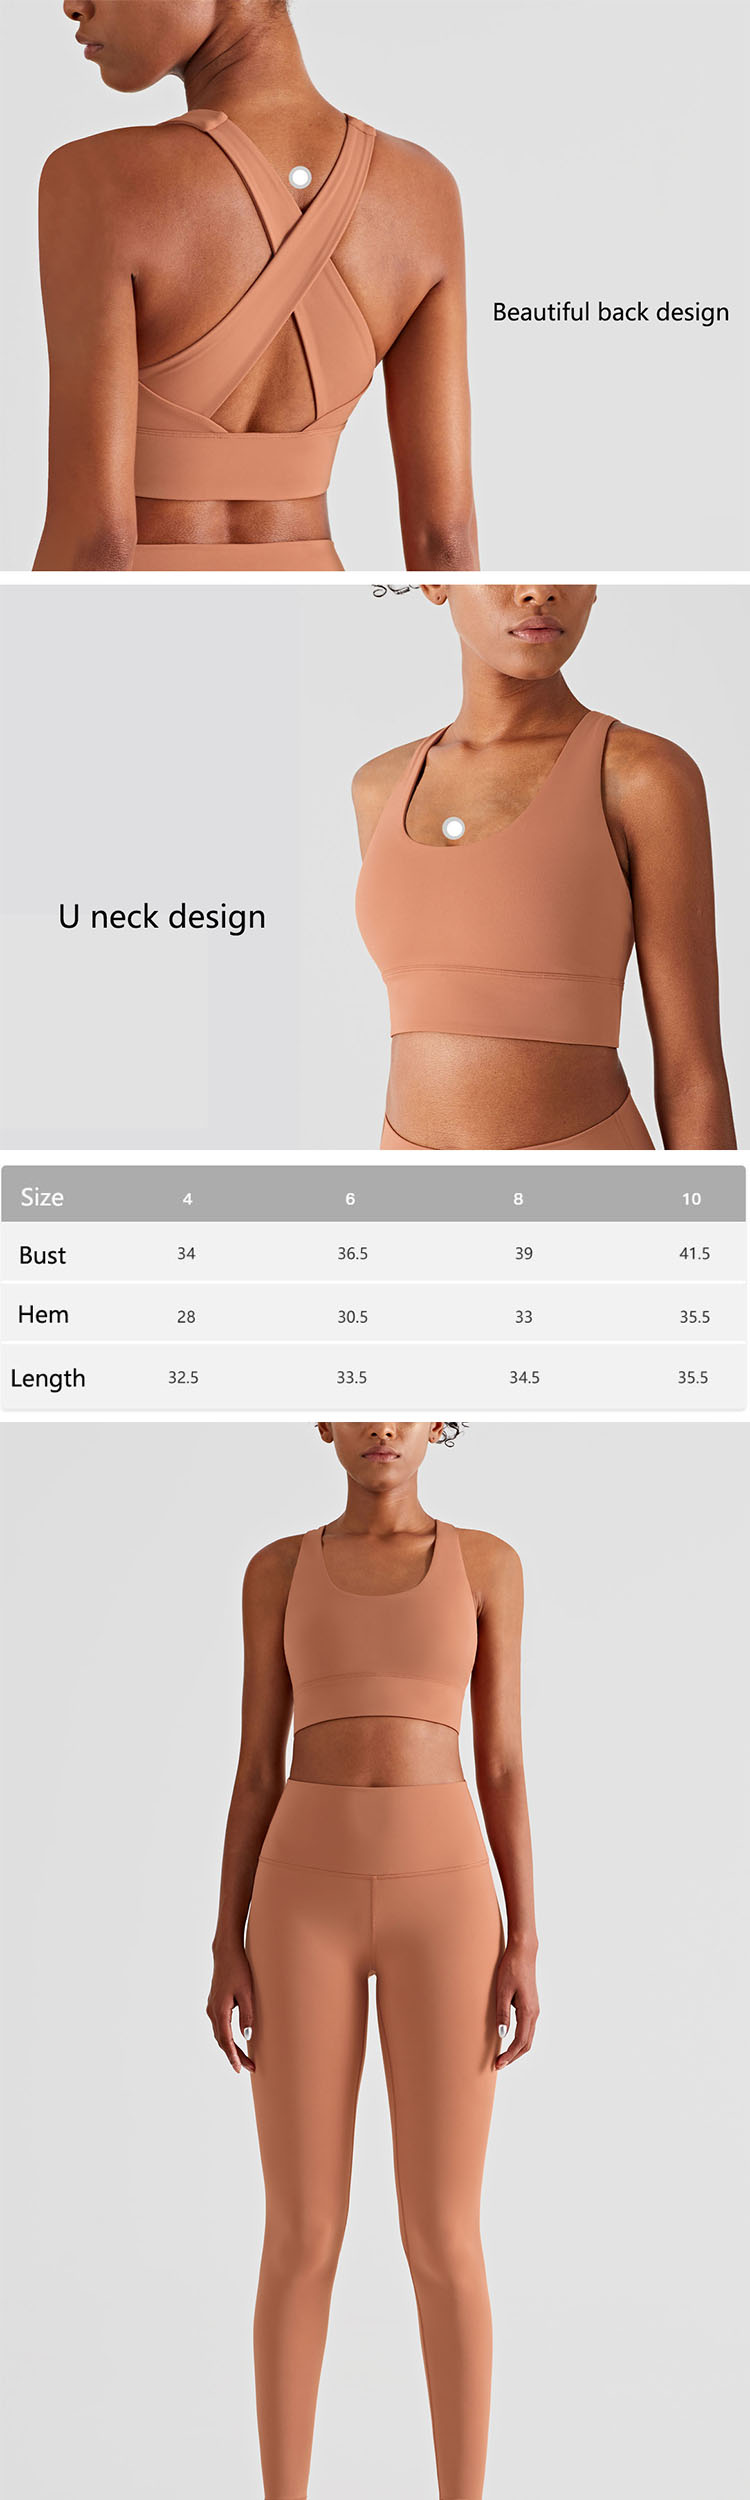 Sports bras for everyday wear is not suitable for exaggerated designs